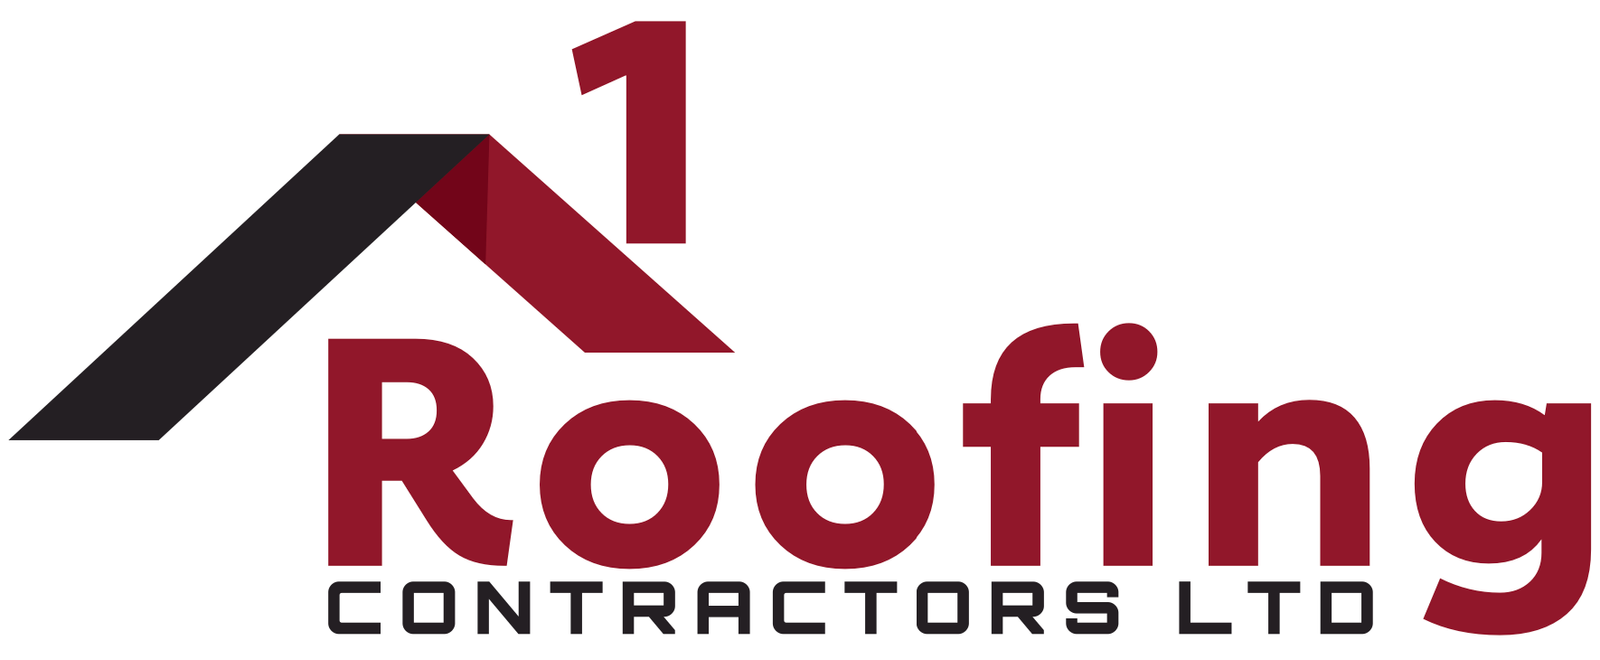 A1 Roofing Ltd